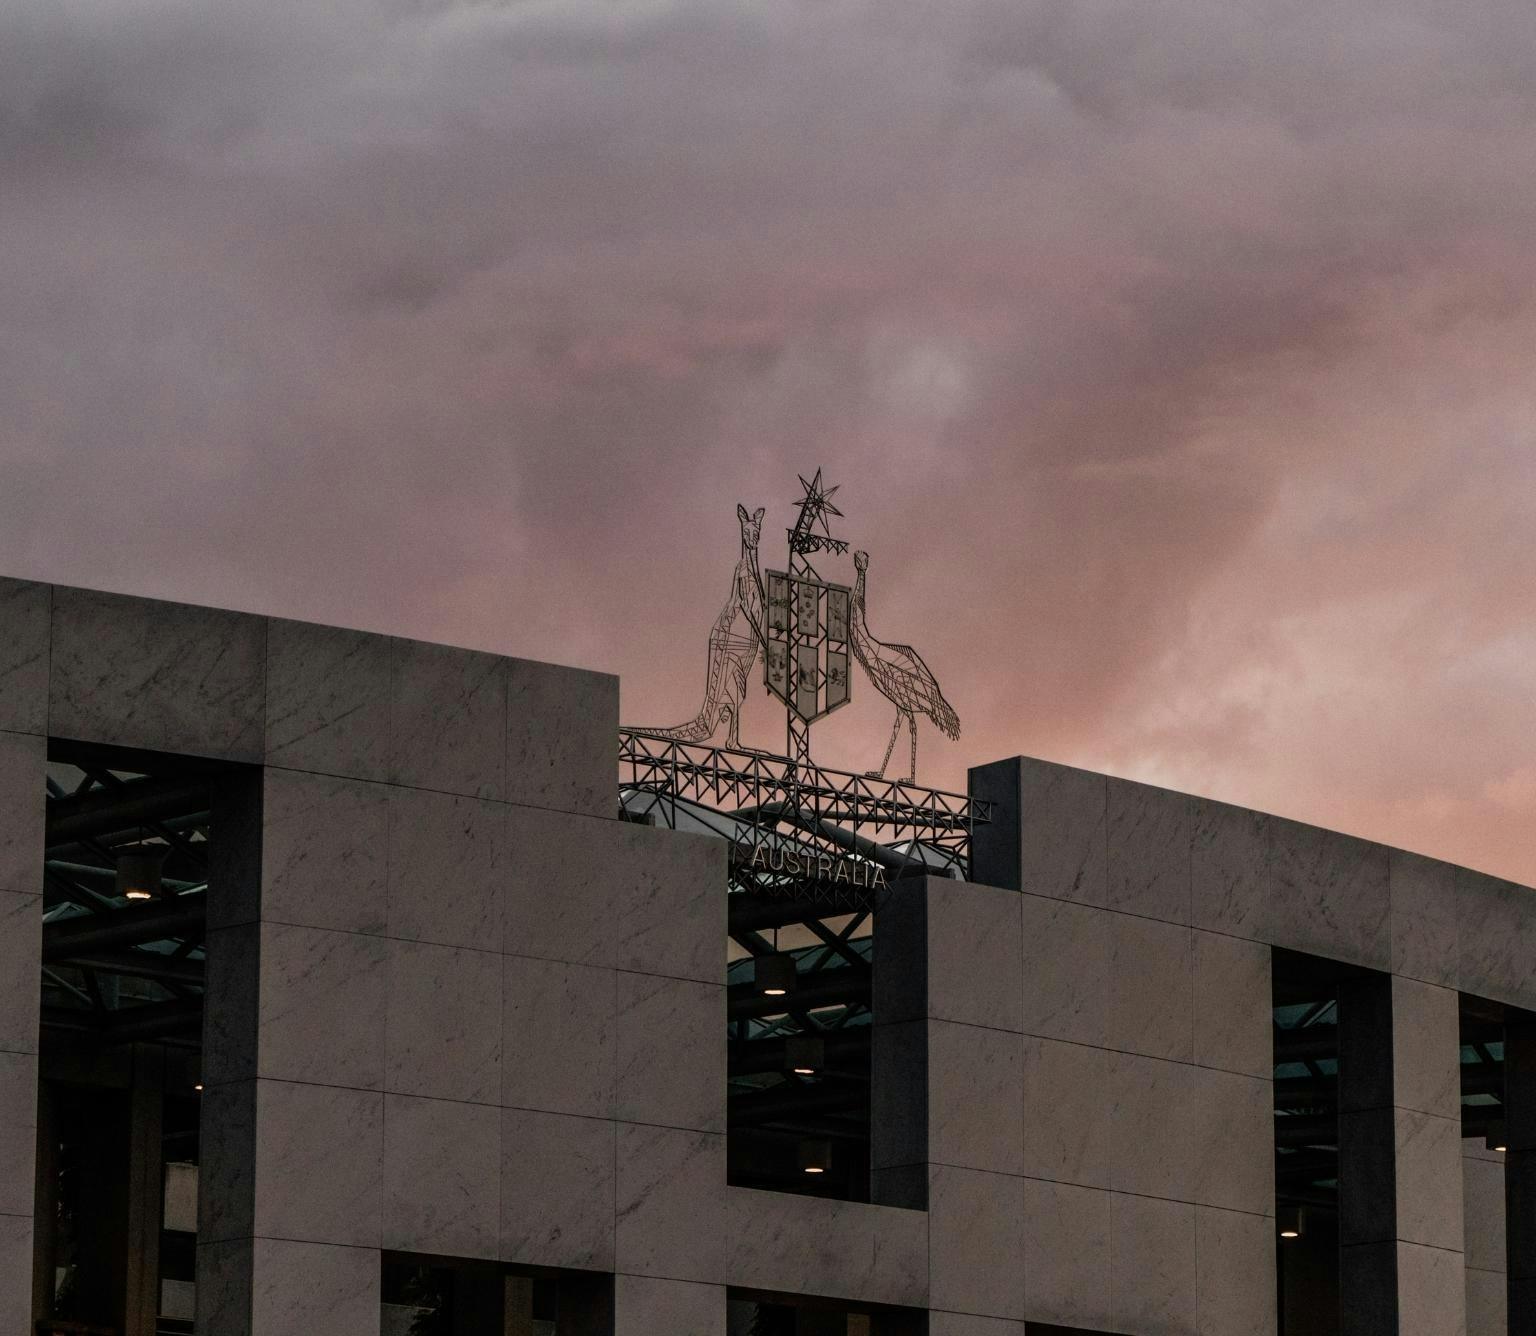 The Australian coat of Arms featuring a shield, an emu and kangaroo above parliament hosue are pictured above a pink sky at dusk.